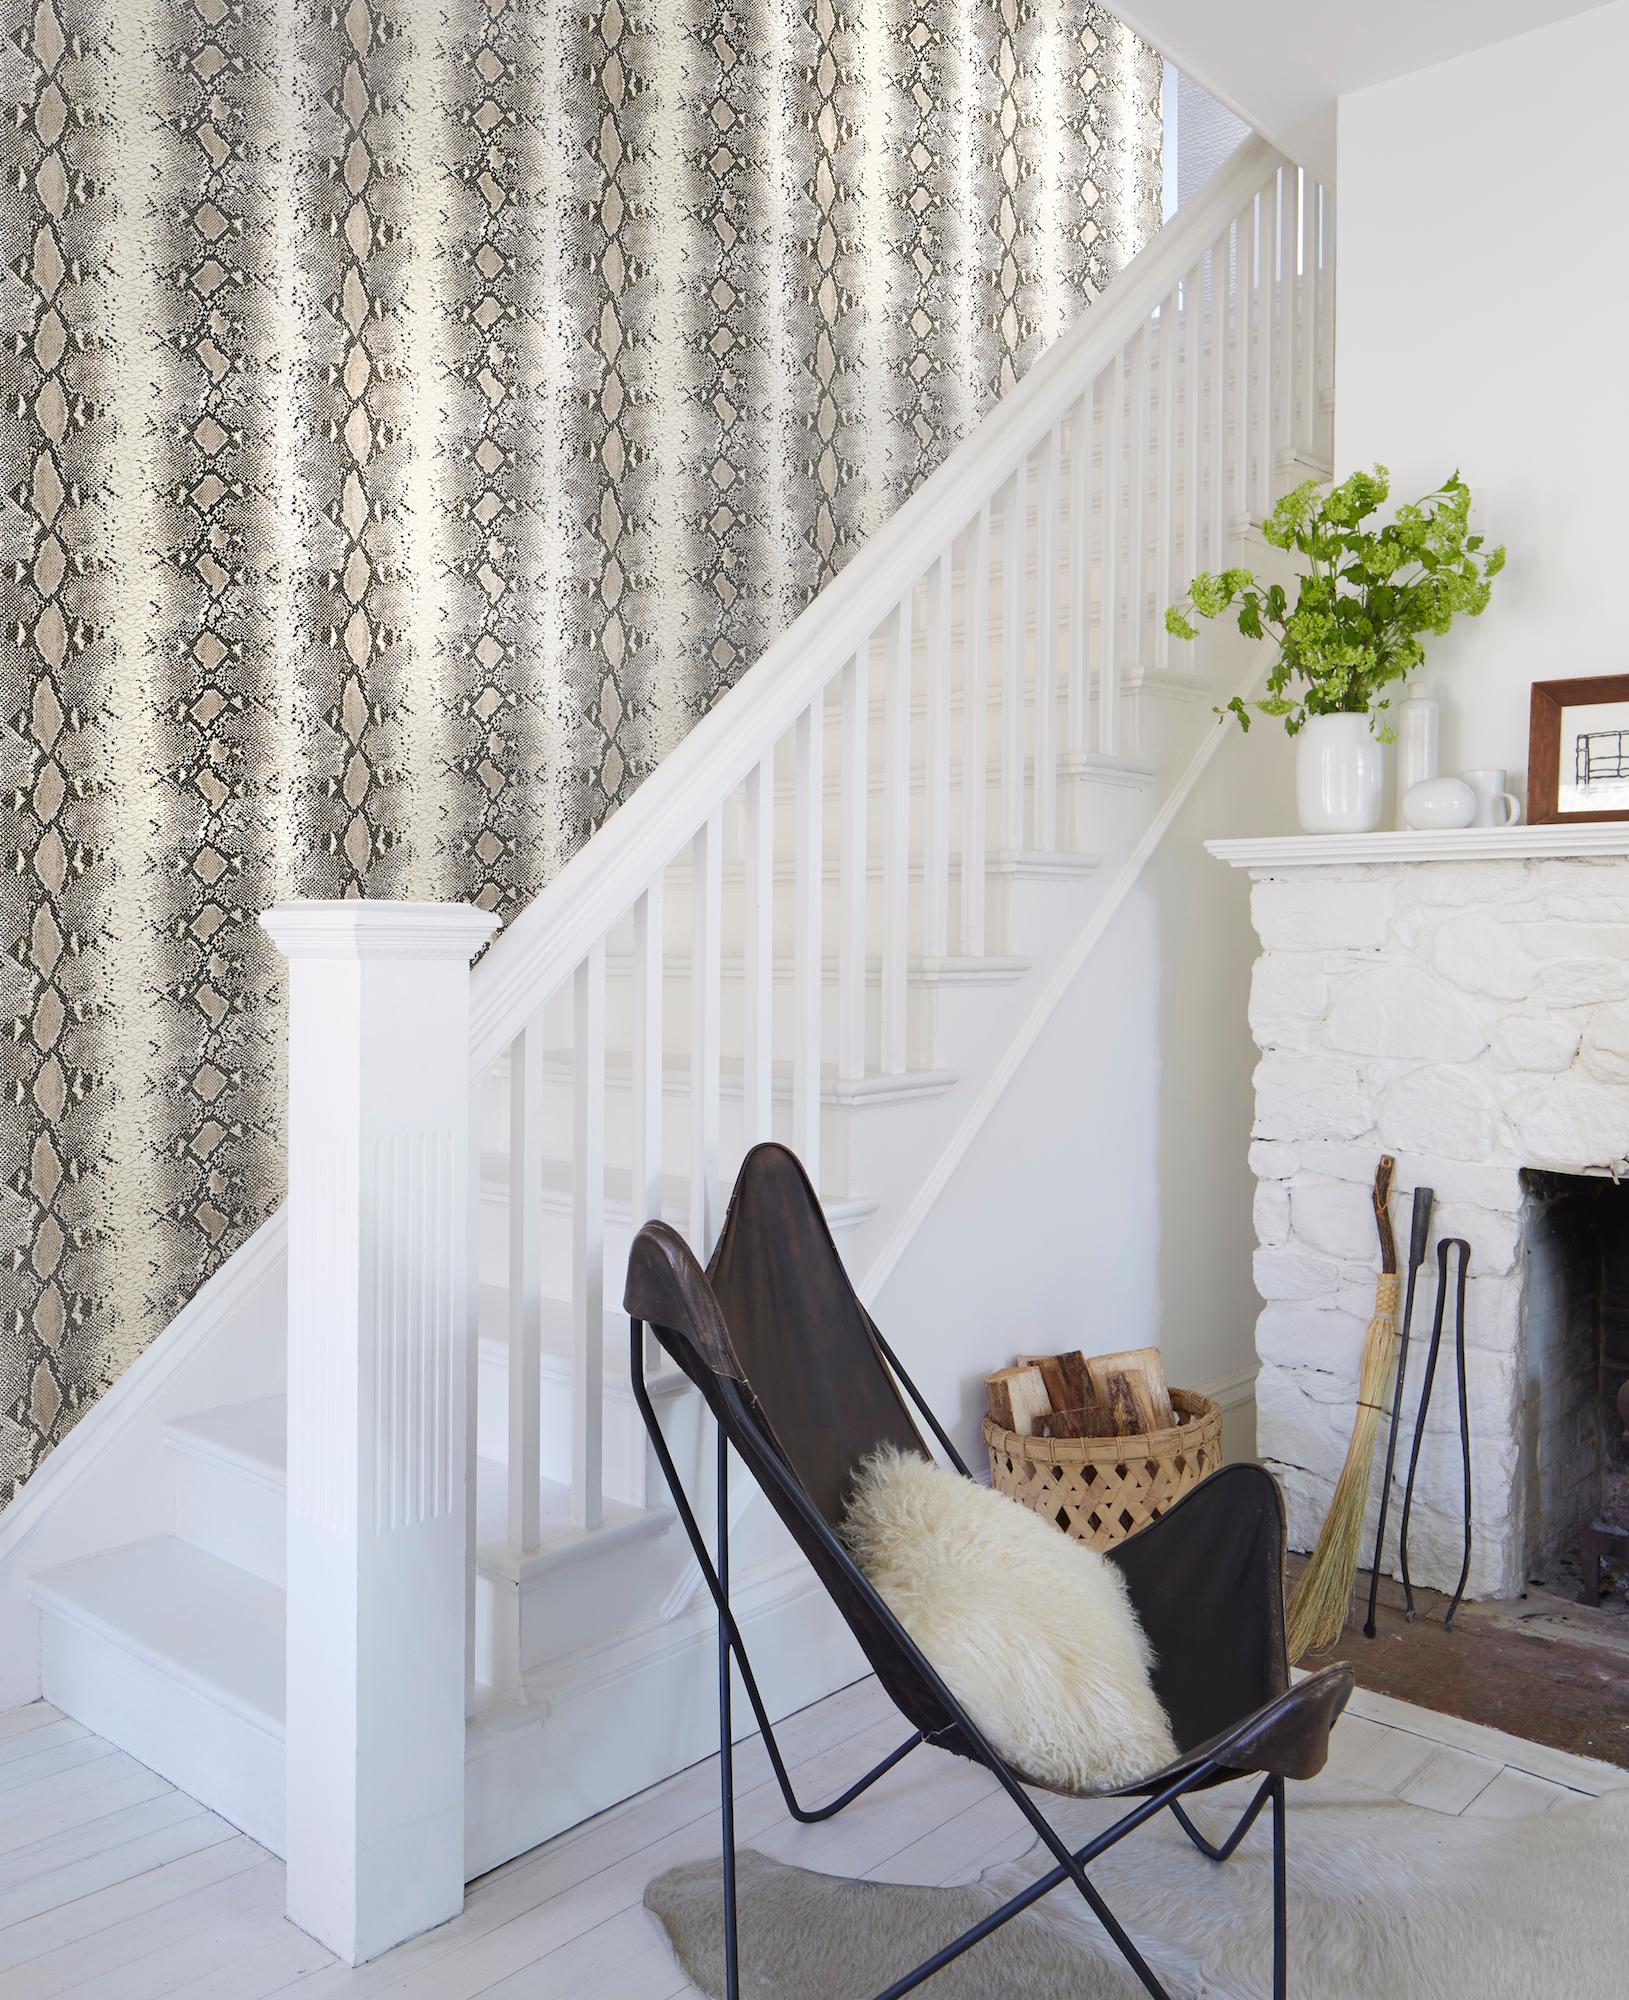 An unabashedly glamorous and sexy wallcovering, finished with a slight gloss that amps up the pattern’s va-va-voom appeal.

Since Schumacher was founded in 1889, our family-owned company has been synonymous with style, taste, and innovation. A